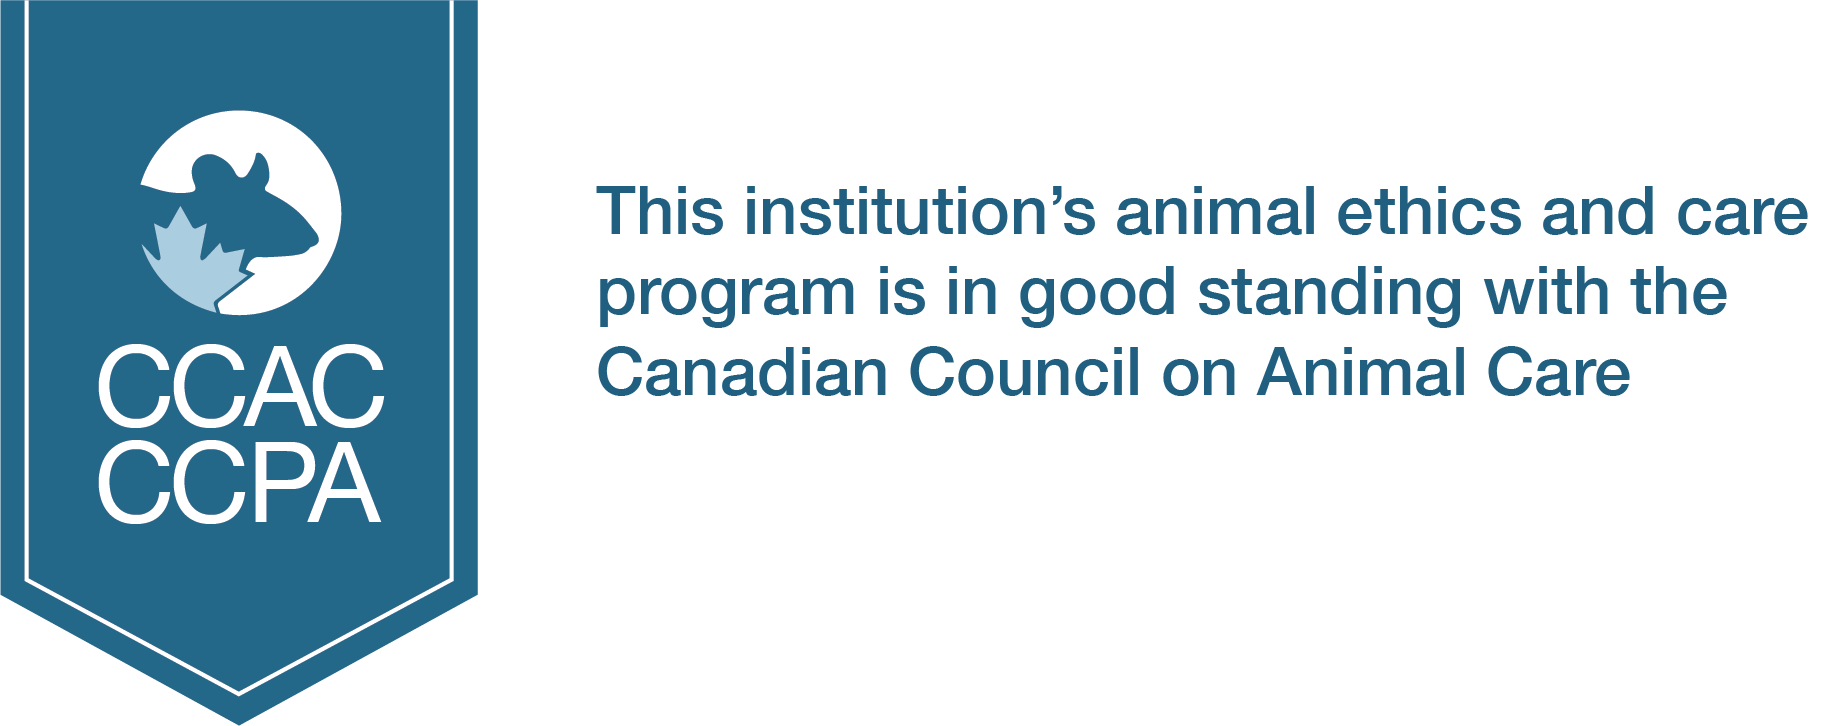 CCAC CCPA: This institution's animal ethics and care program is in good standing with the Canadian Council on Animal Care